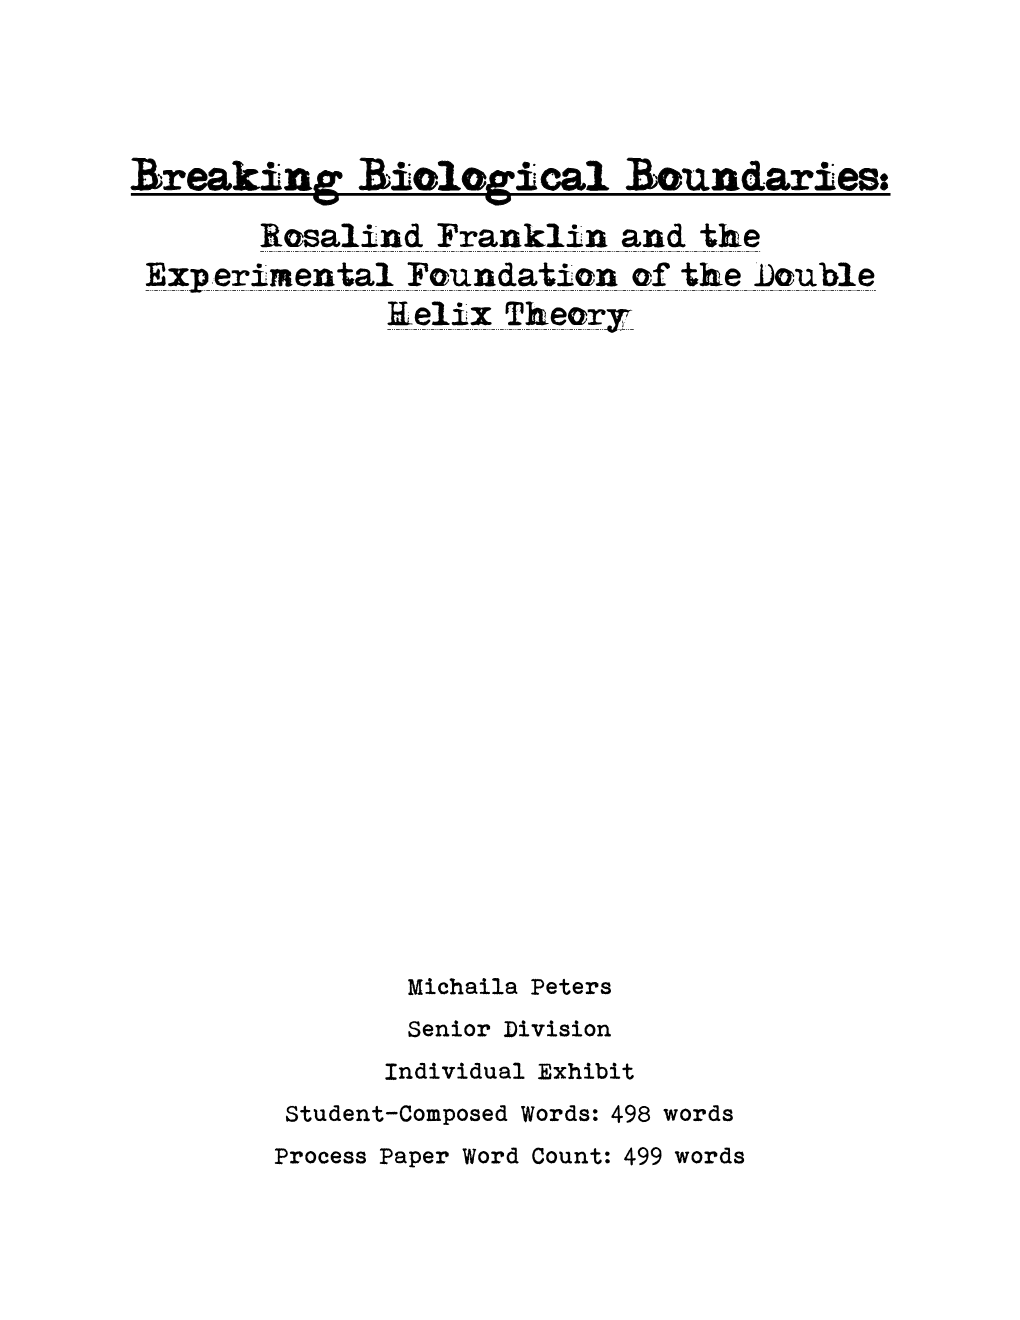 Breaking Biological Boundaries: Rosalind Franklin and the Experimental Foundation of the Double Helix Theory